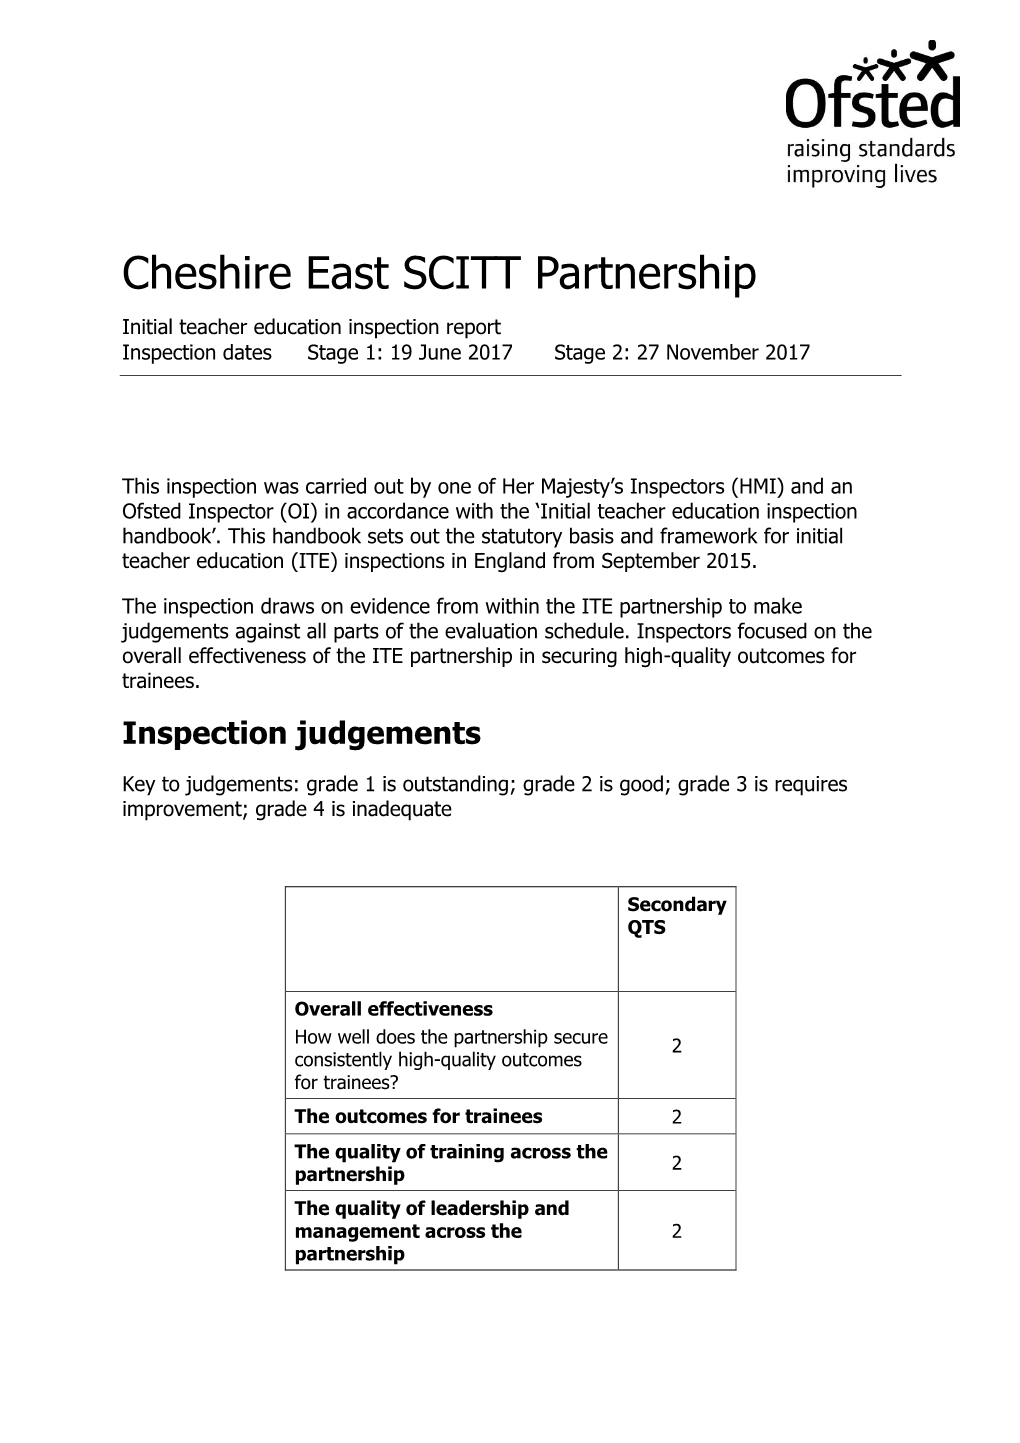 Cheshire East SCITT Partnership Initial Teacher Education Inspection Report Inspection Dates Stage 1: 19 June 2017 Stage 2: 27 November 2017